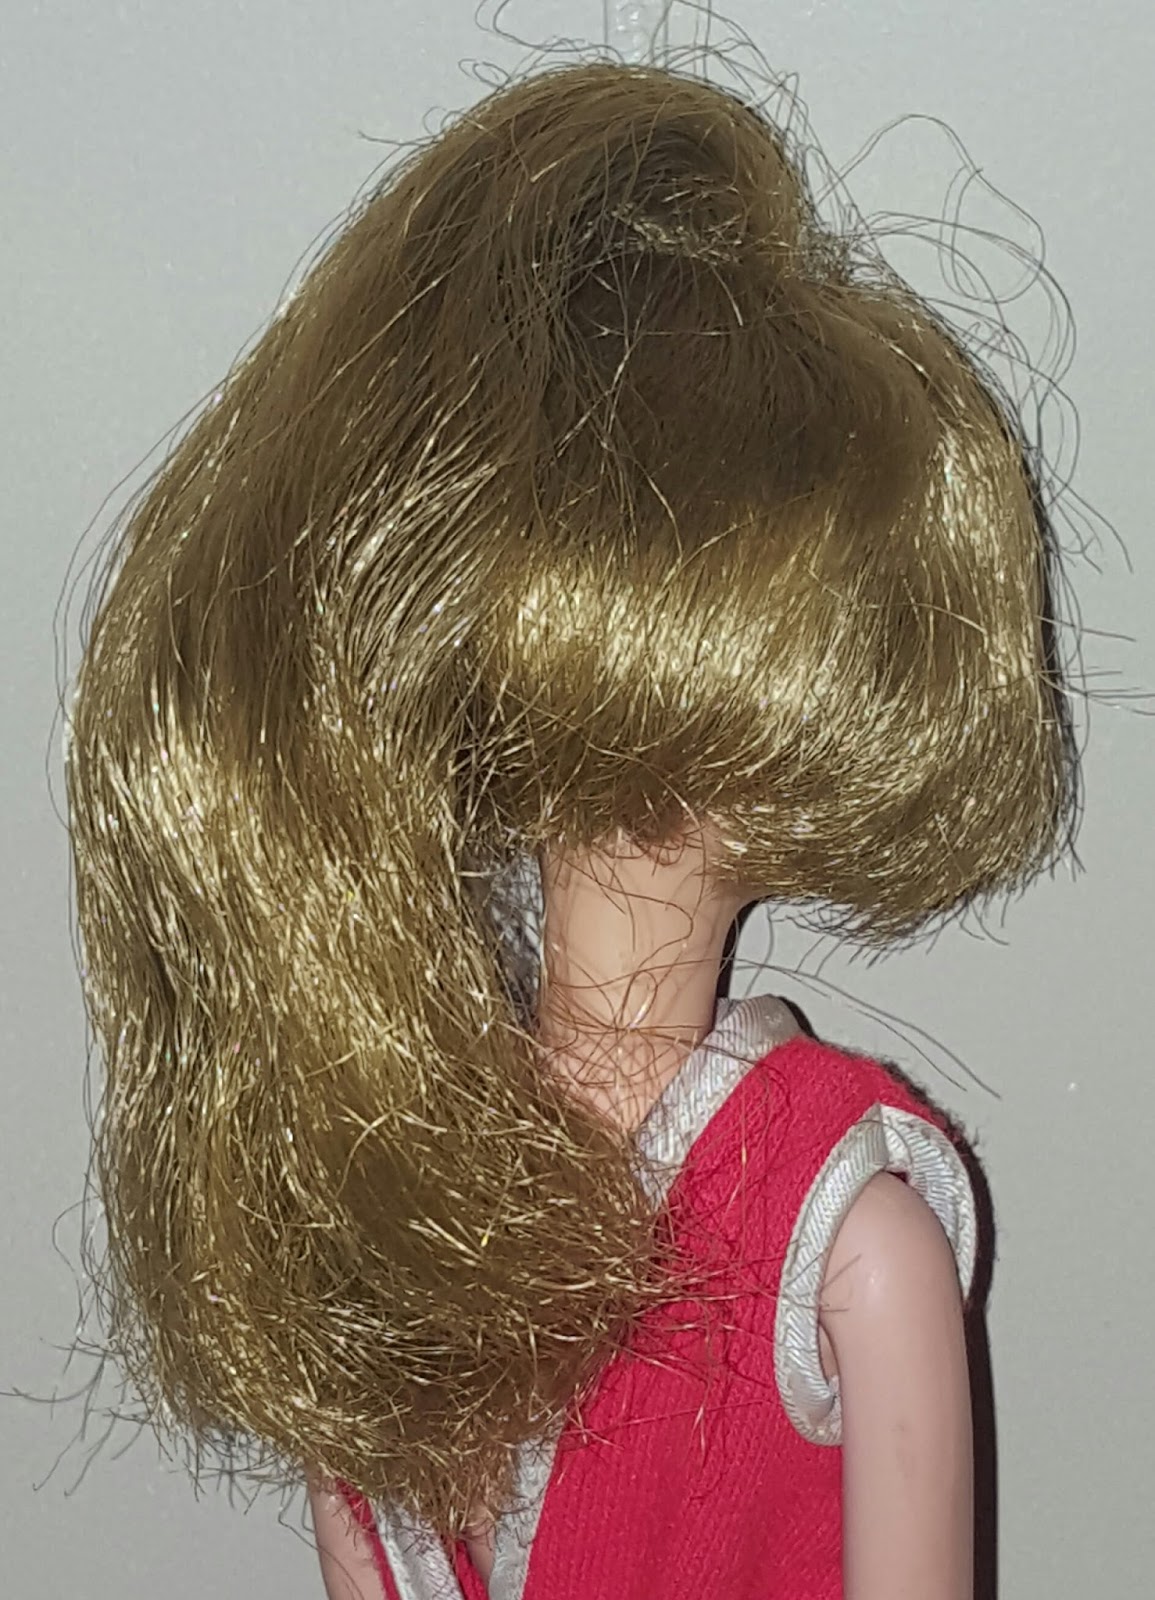 American Character Mary Makeup Doll, Friend of Tressy C. 1964 